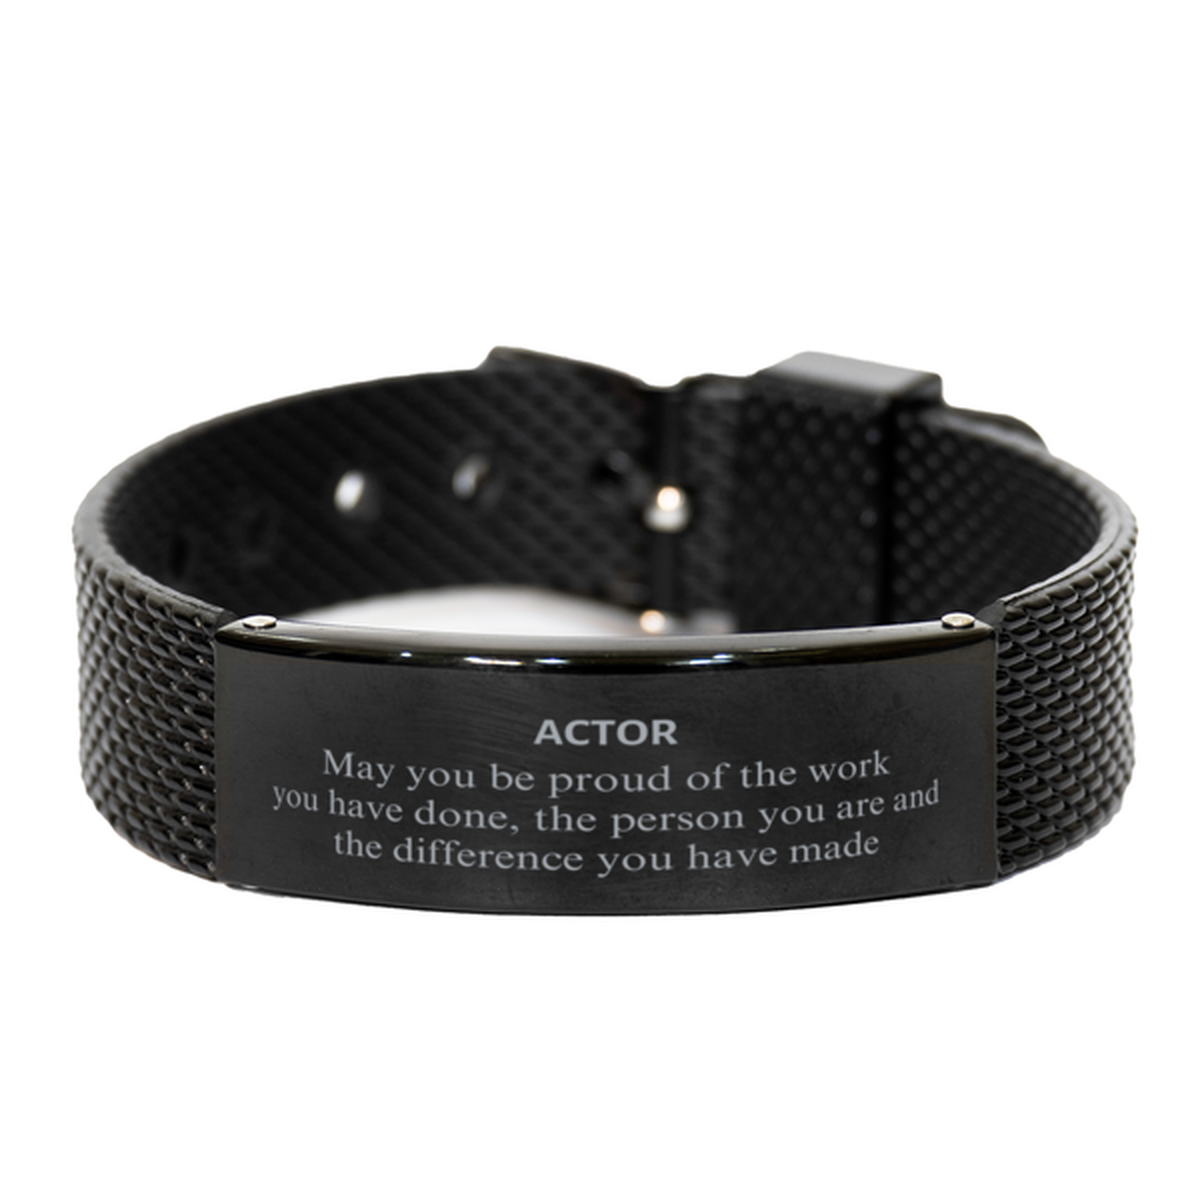 Actor May you be proud of the work you have done, Retirement Actor Black Shark Mesh Bracelet for Colleague Appreciation Gifts Amazing for Actor